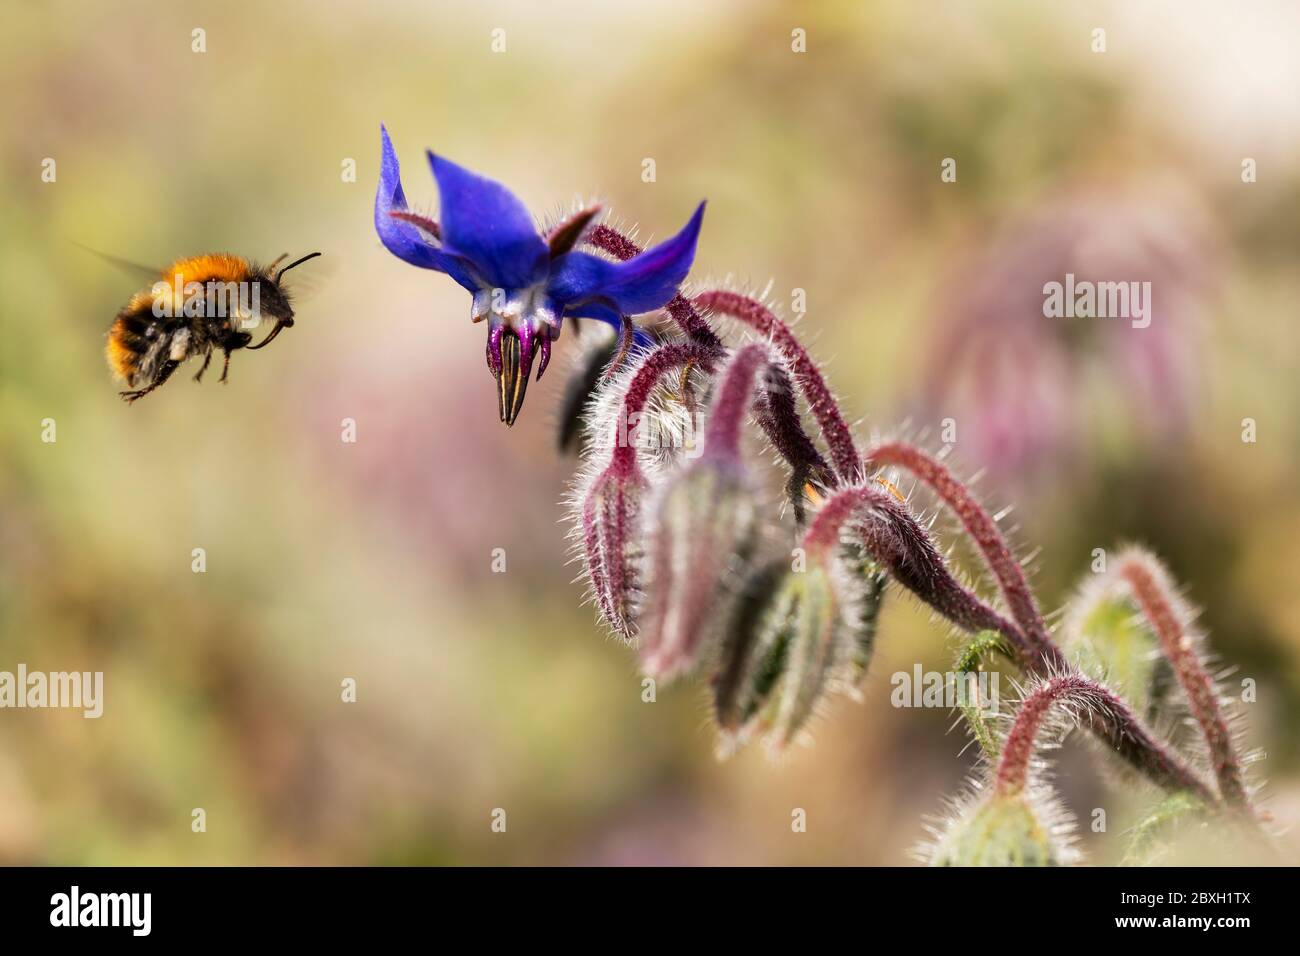 Bumblebee hovering by a blue borage flower. Fine detail on the plant and bee with motion blur on wings. Background has bright bokeh. Stock Photo